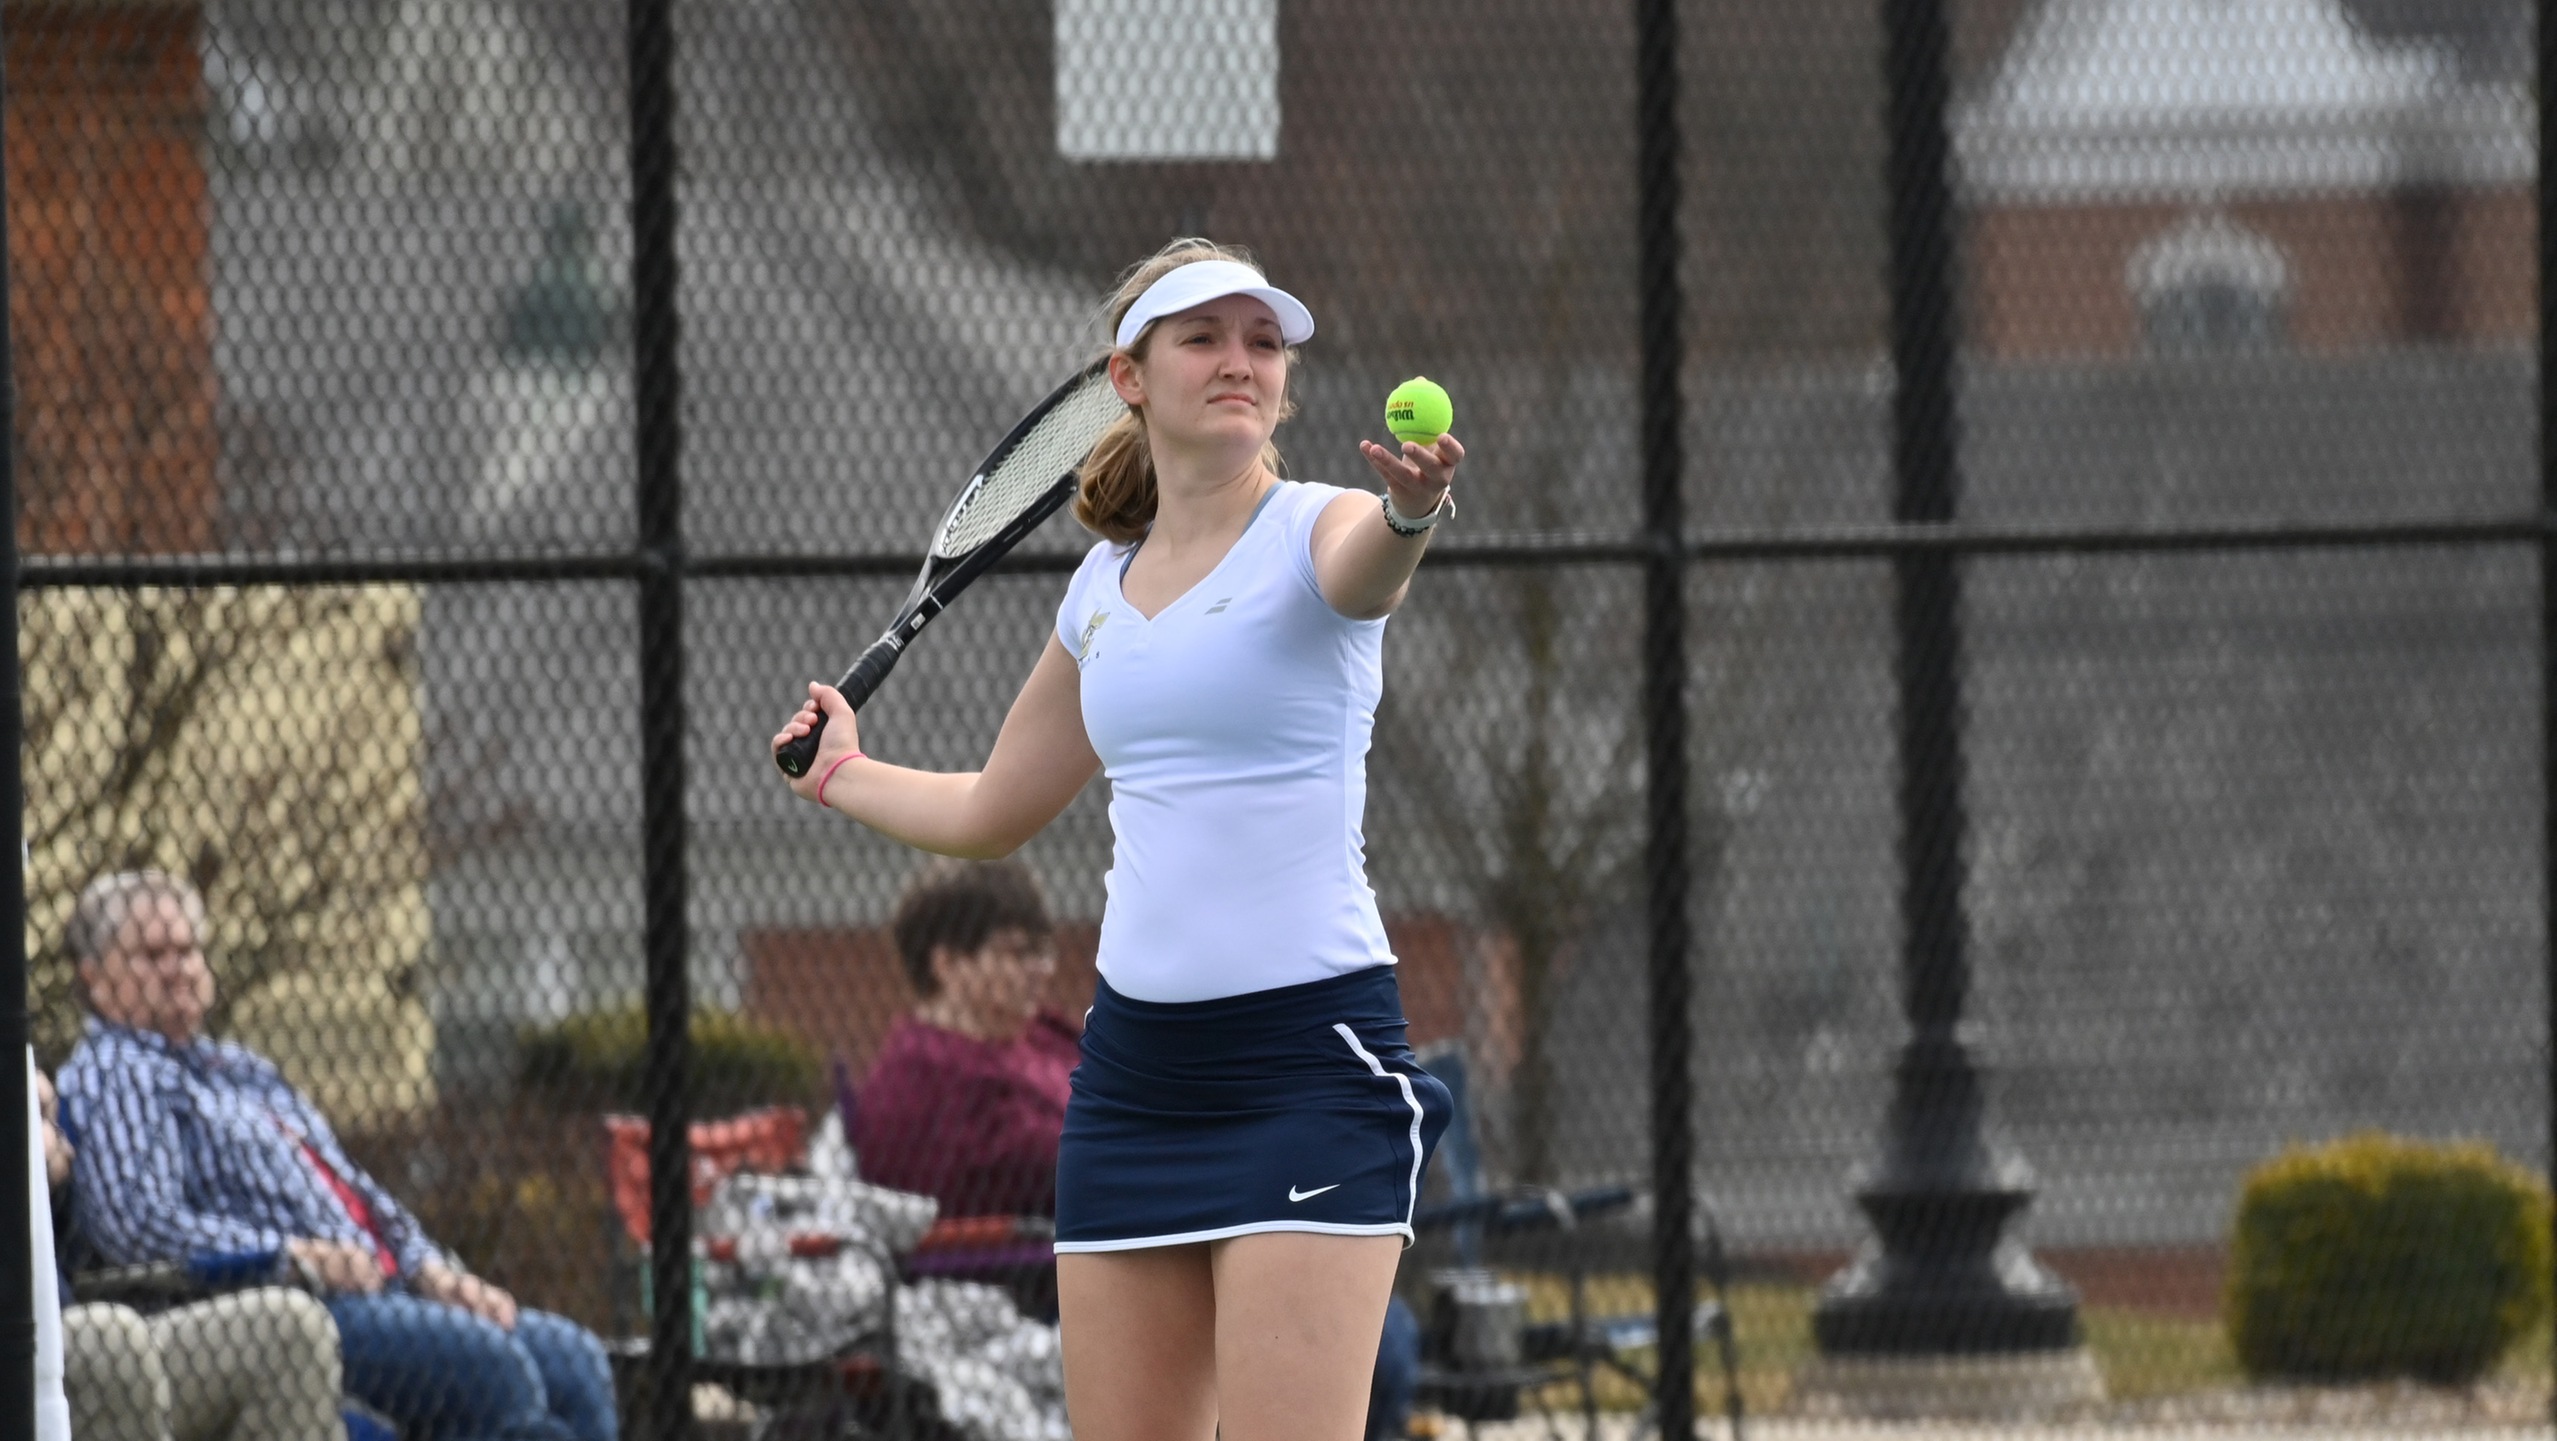 Eagles Drop Conference Match to Royals